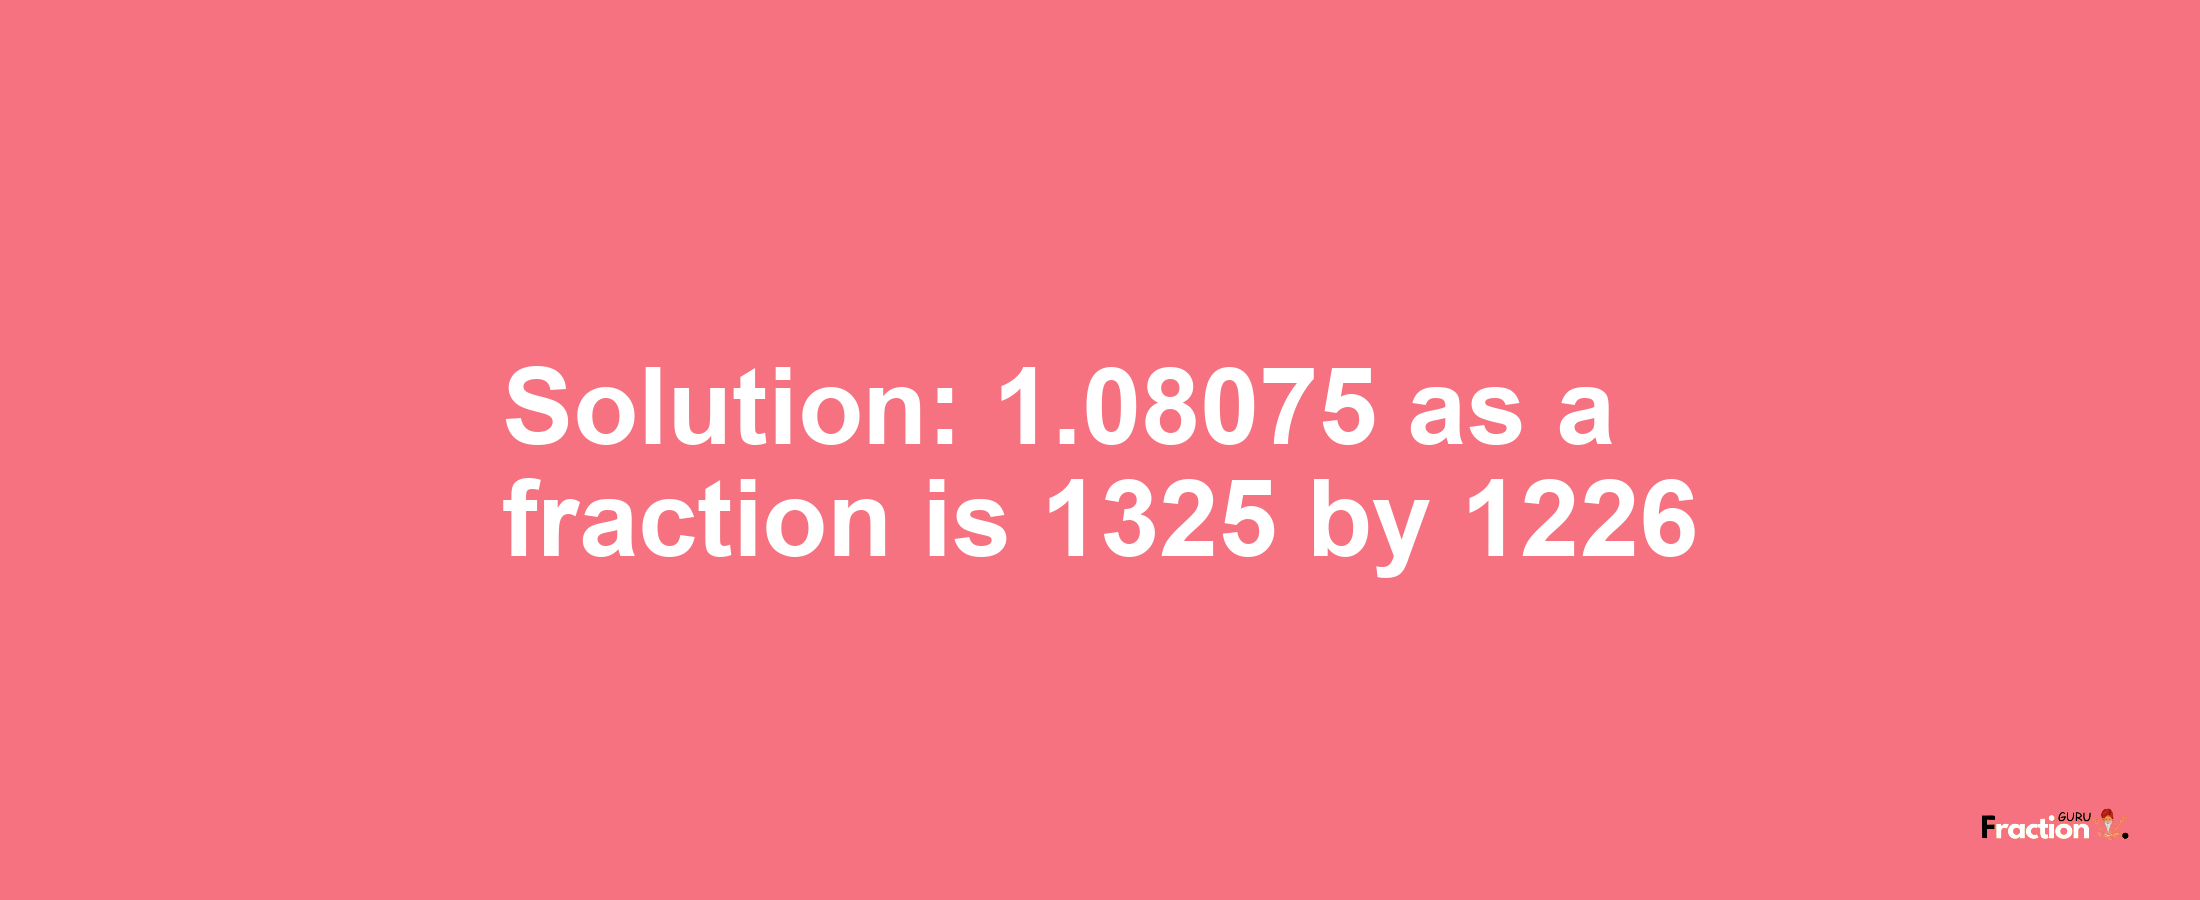 Solution:1.08075 as a fraction is 1325/1226